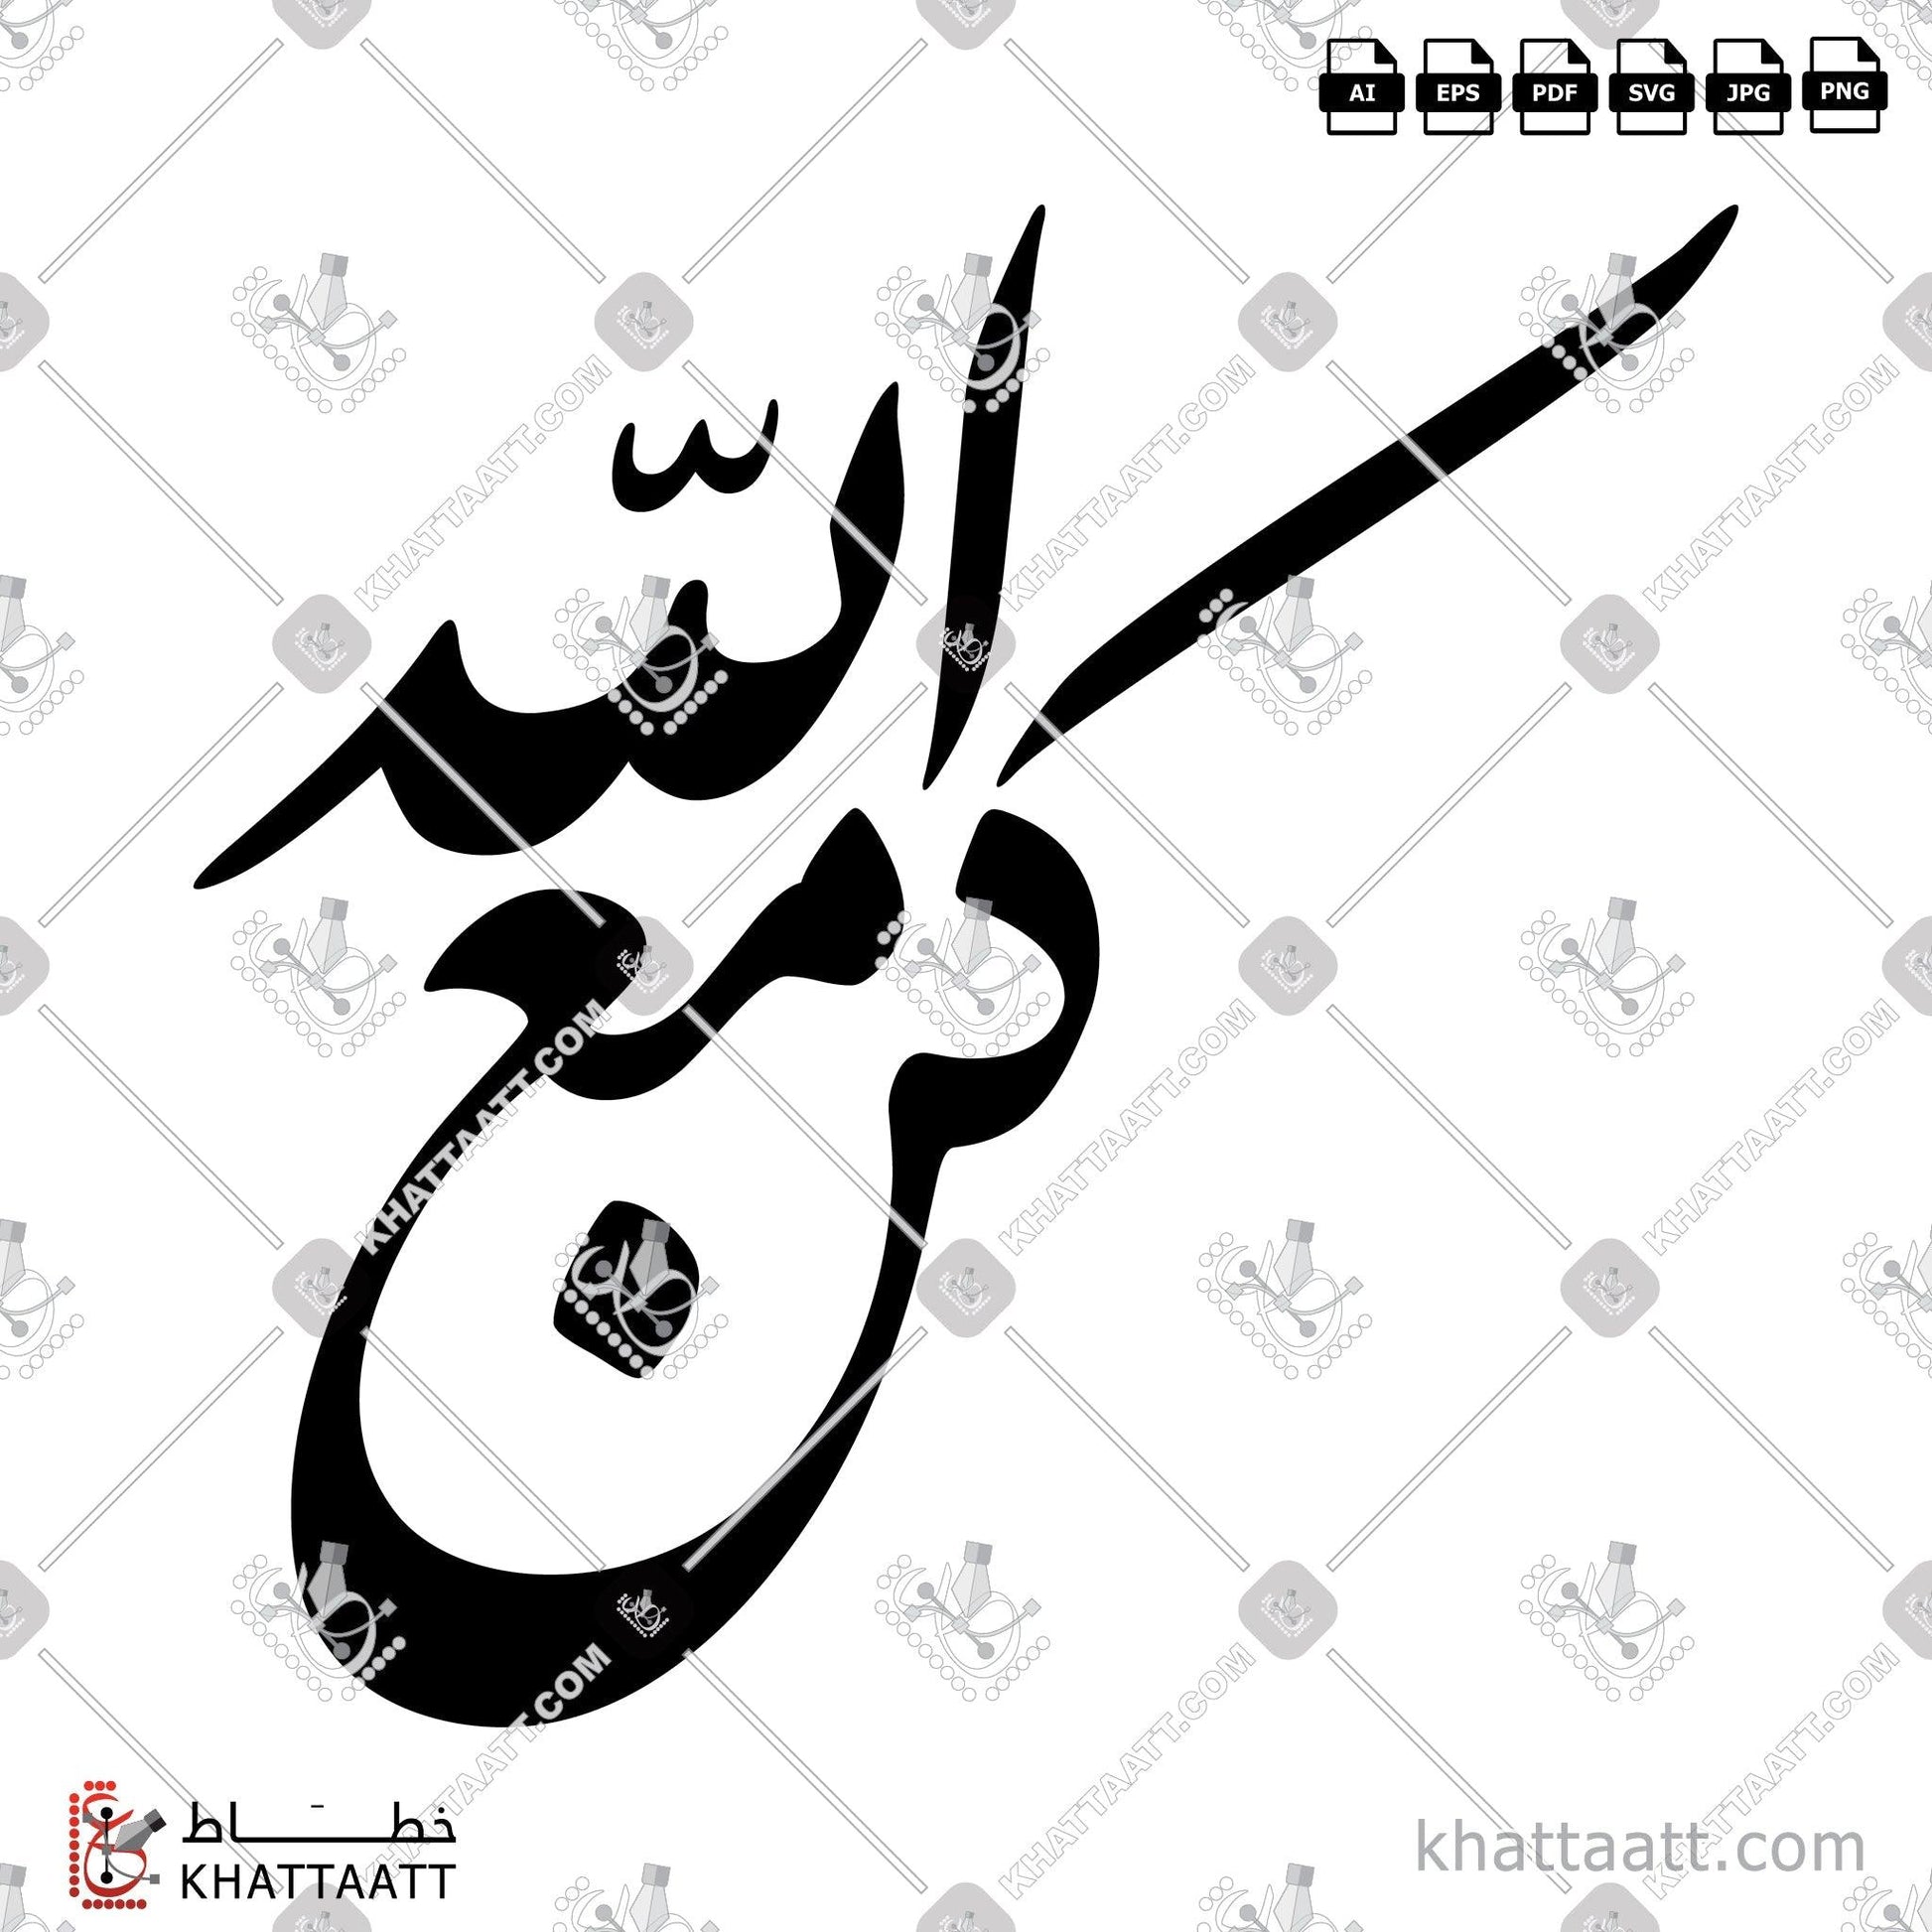 Download Arabic Calligraphy of كن مع الله in Farsi - الخط الفارسي in vector and .png